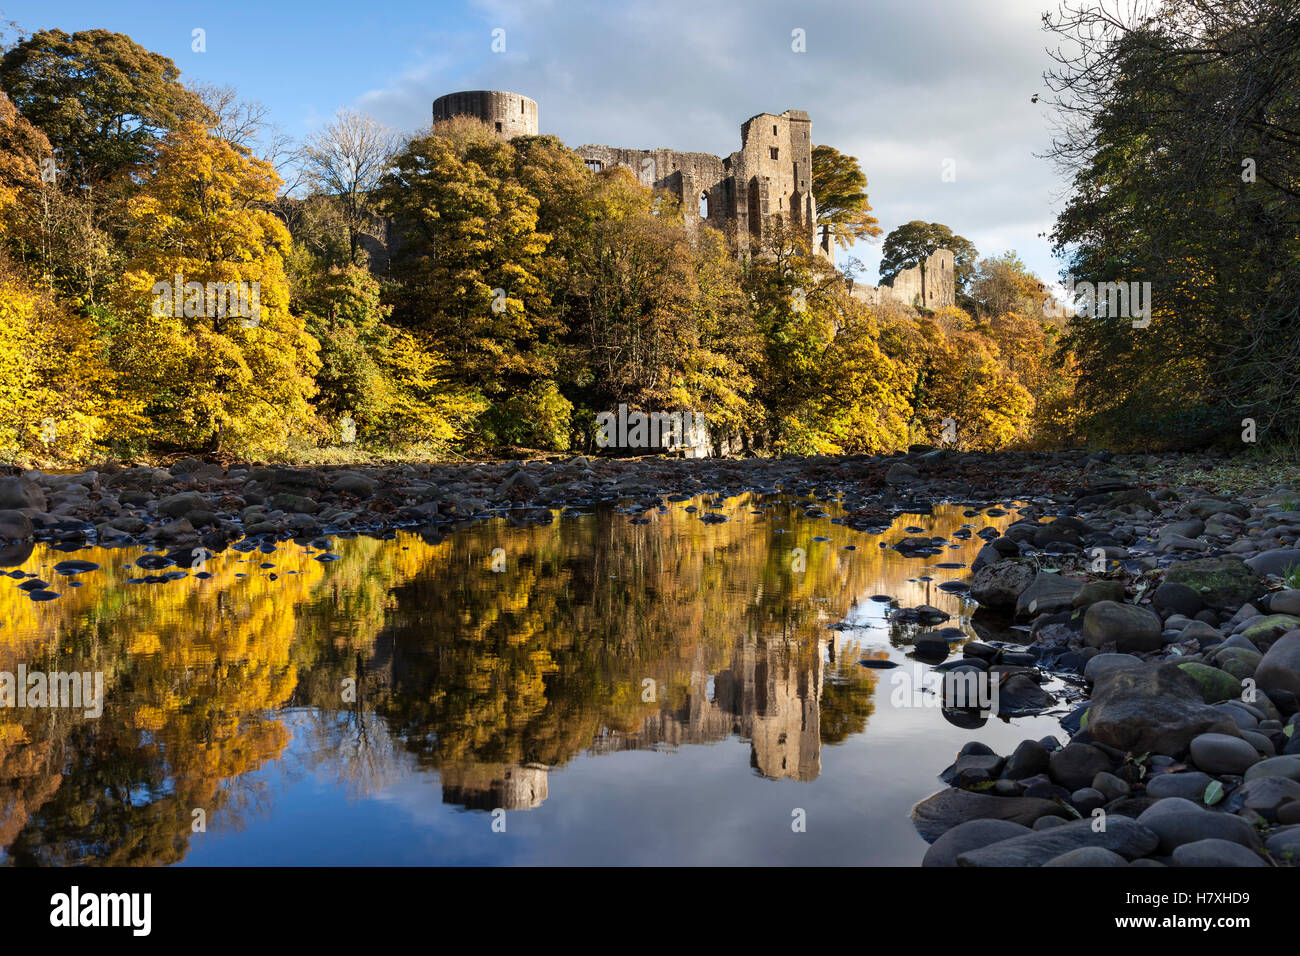 The medieval ruins of Barnard Castle reflected in the River Tees in Autumn, Barnard Castle, Teesdale, County Durham, UK Stock Photo